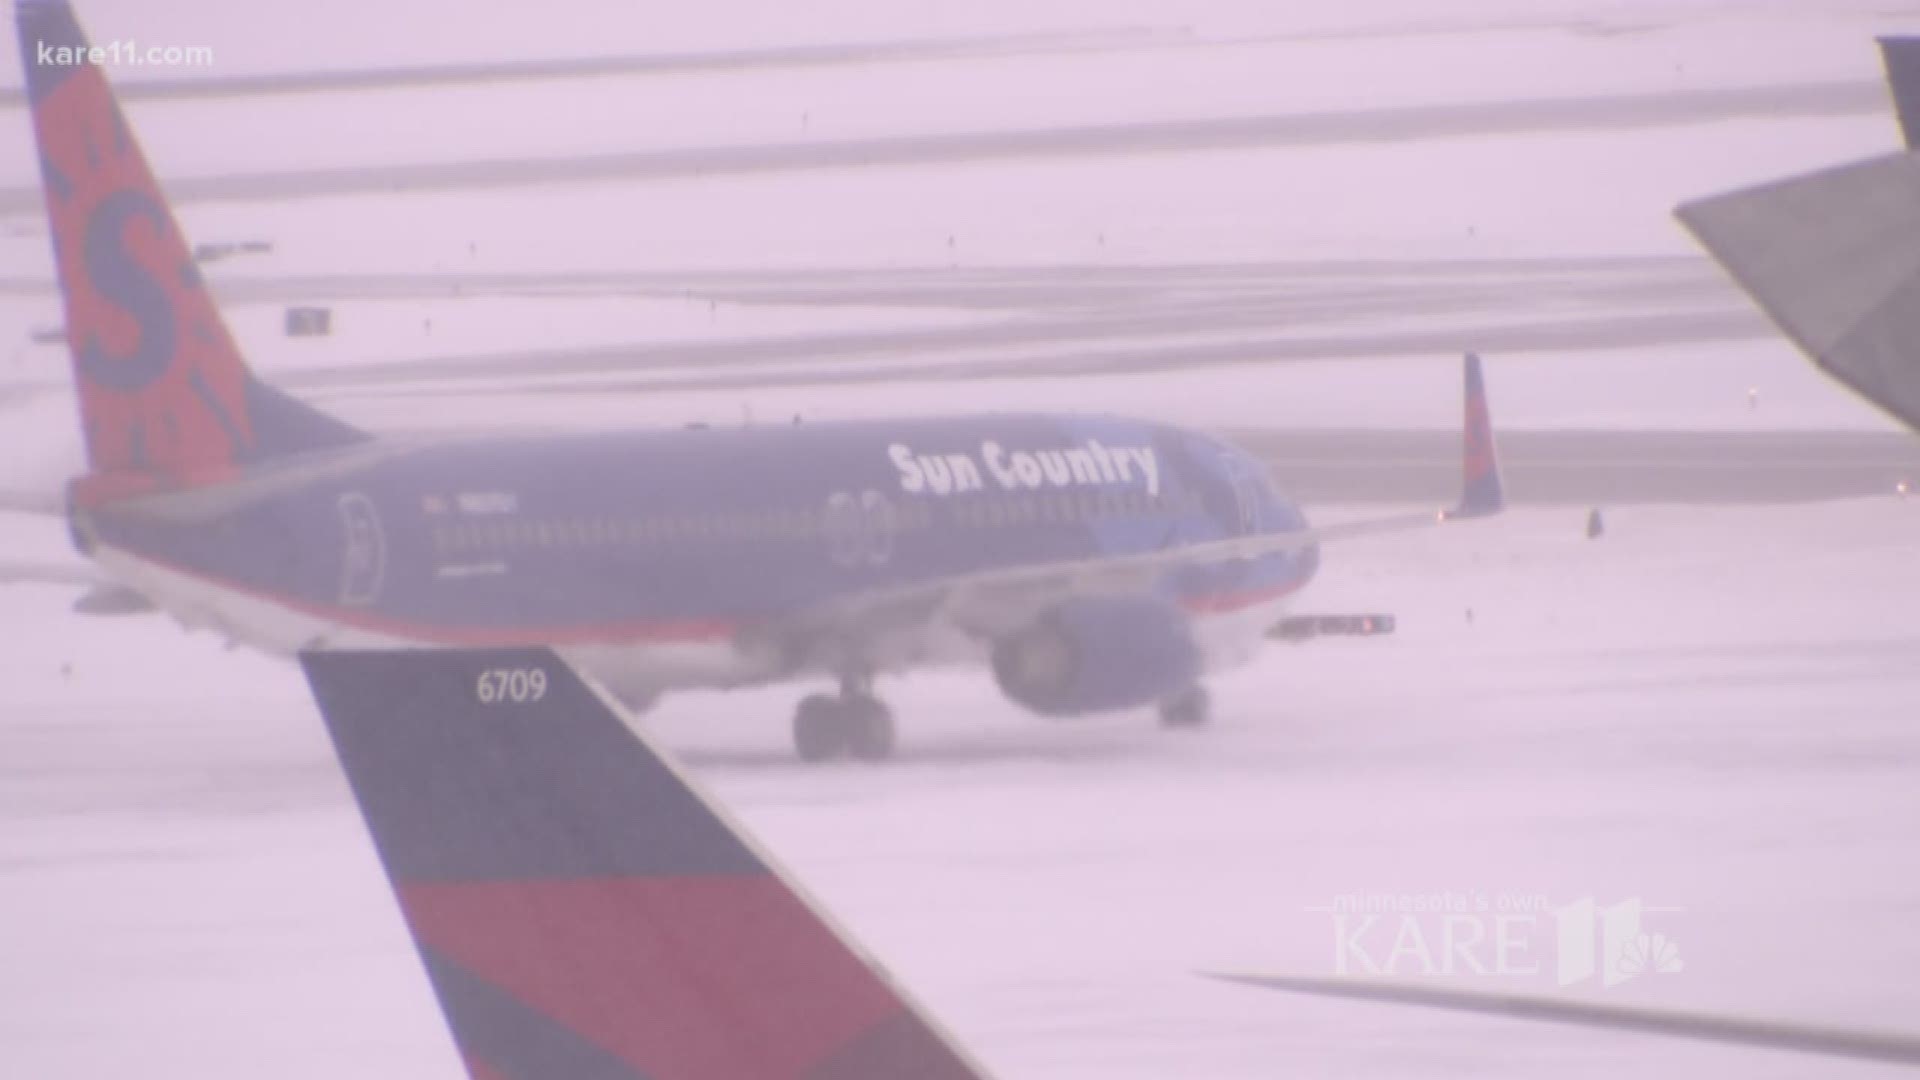 Senator Tina Smith wrote a letter to the Department of Transportation asking to look into Sun Country's failures and to explain what is being done to ensure that airline cancellation policies protect travelers. https://kare11.tv/2HsS485